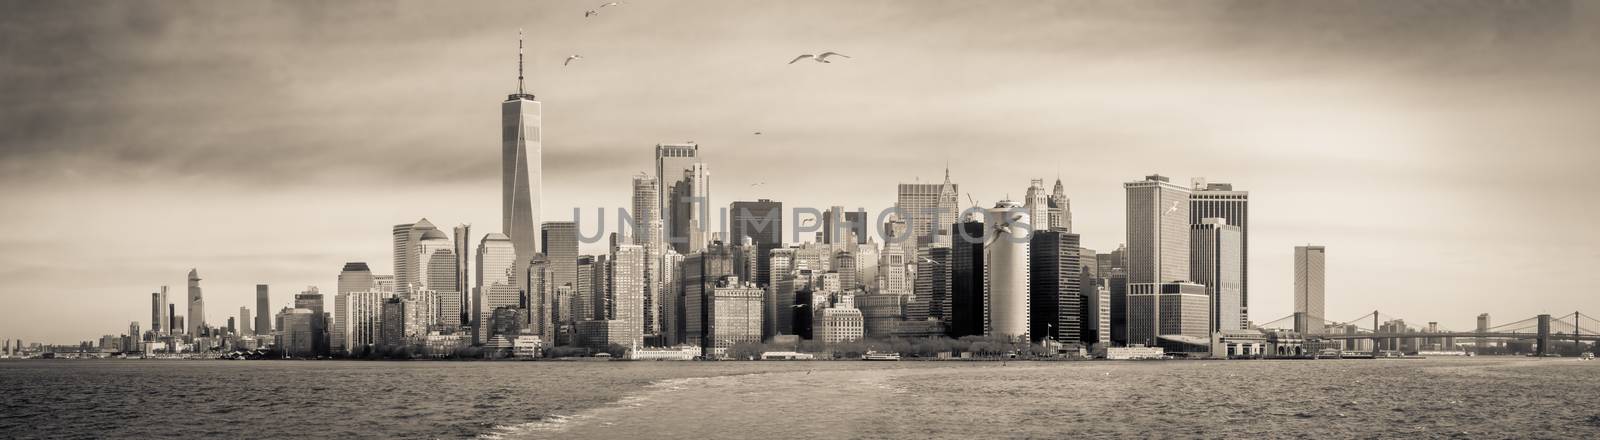 Sepia Toned Panorama Of The Manhattan, NYC Skyline As Taken From Staten Island